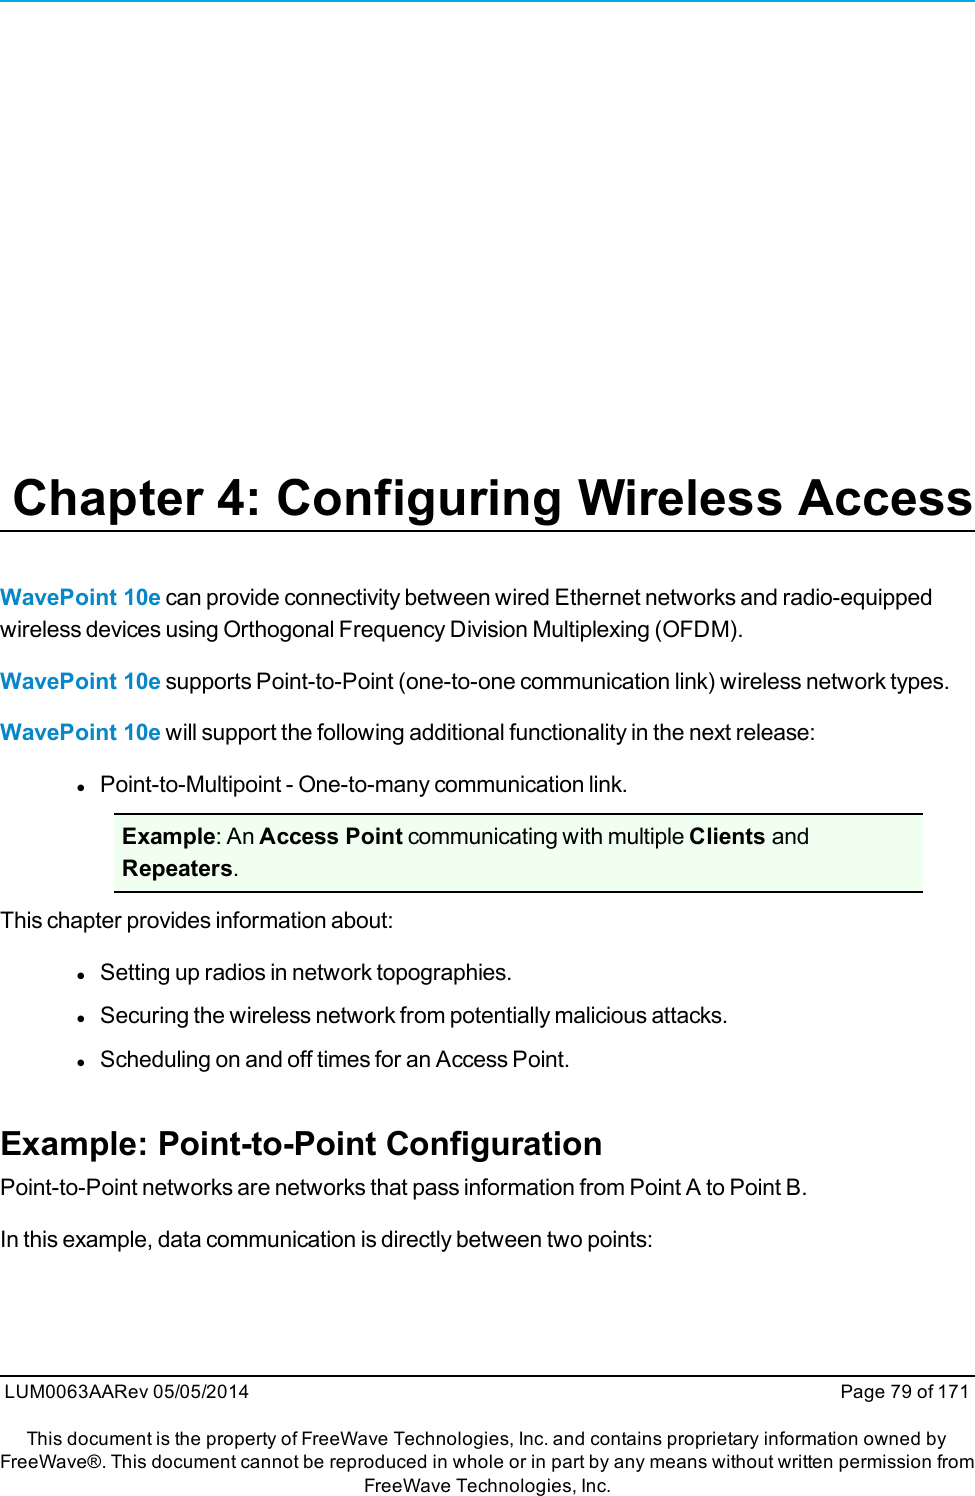 Chapter 4: Configuring Wireless AccessWavePoint 10e can provide connectivity between wired Ethernet networks and radio-equippedwireless devices using Orthogonal Frequency Division Multiplexing (OFDM).WavePoint 10e supports Point-to-Point (one-to-one communication link) wireless network types.WavePoint 10e will support the following additional functionality in the next release:lPoint-to-Multipoint - One-to-many communication link.Example: An Access Point communicating with multiple Clients andRepeaters.This chapter provides information about:lSetting up radios in network topographies.lSecuring the wireless network from potentially malicious attacks.lScheduling on and off times for an Access Point.Example: Point-to-Point ConfigurationPoint-to-Point networks are networks that pass information from Point A to Point B.In this example, data communication is directly between two points:LUM0063AARev 05/05/2014 Page 79 of 171This document is the property of FreeWave Technologies, Inc. and contains proprietary information owned byFreeWave®. This document cannot be reproduced in whole or in part by any means without written permission fromFreeWave Technologies, Inc.